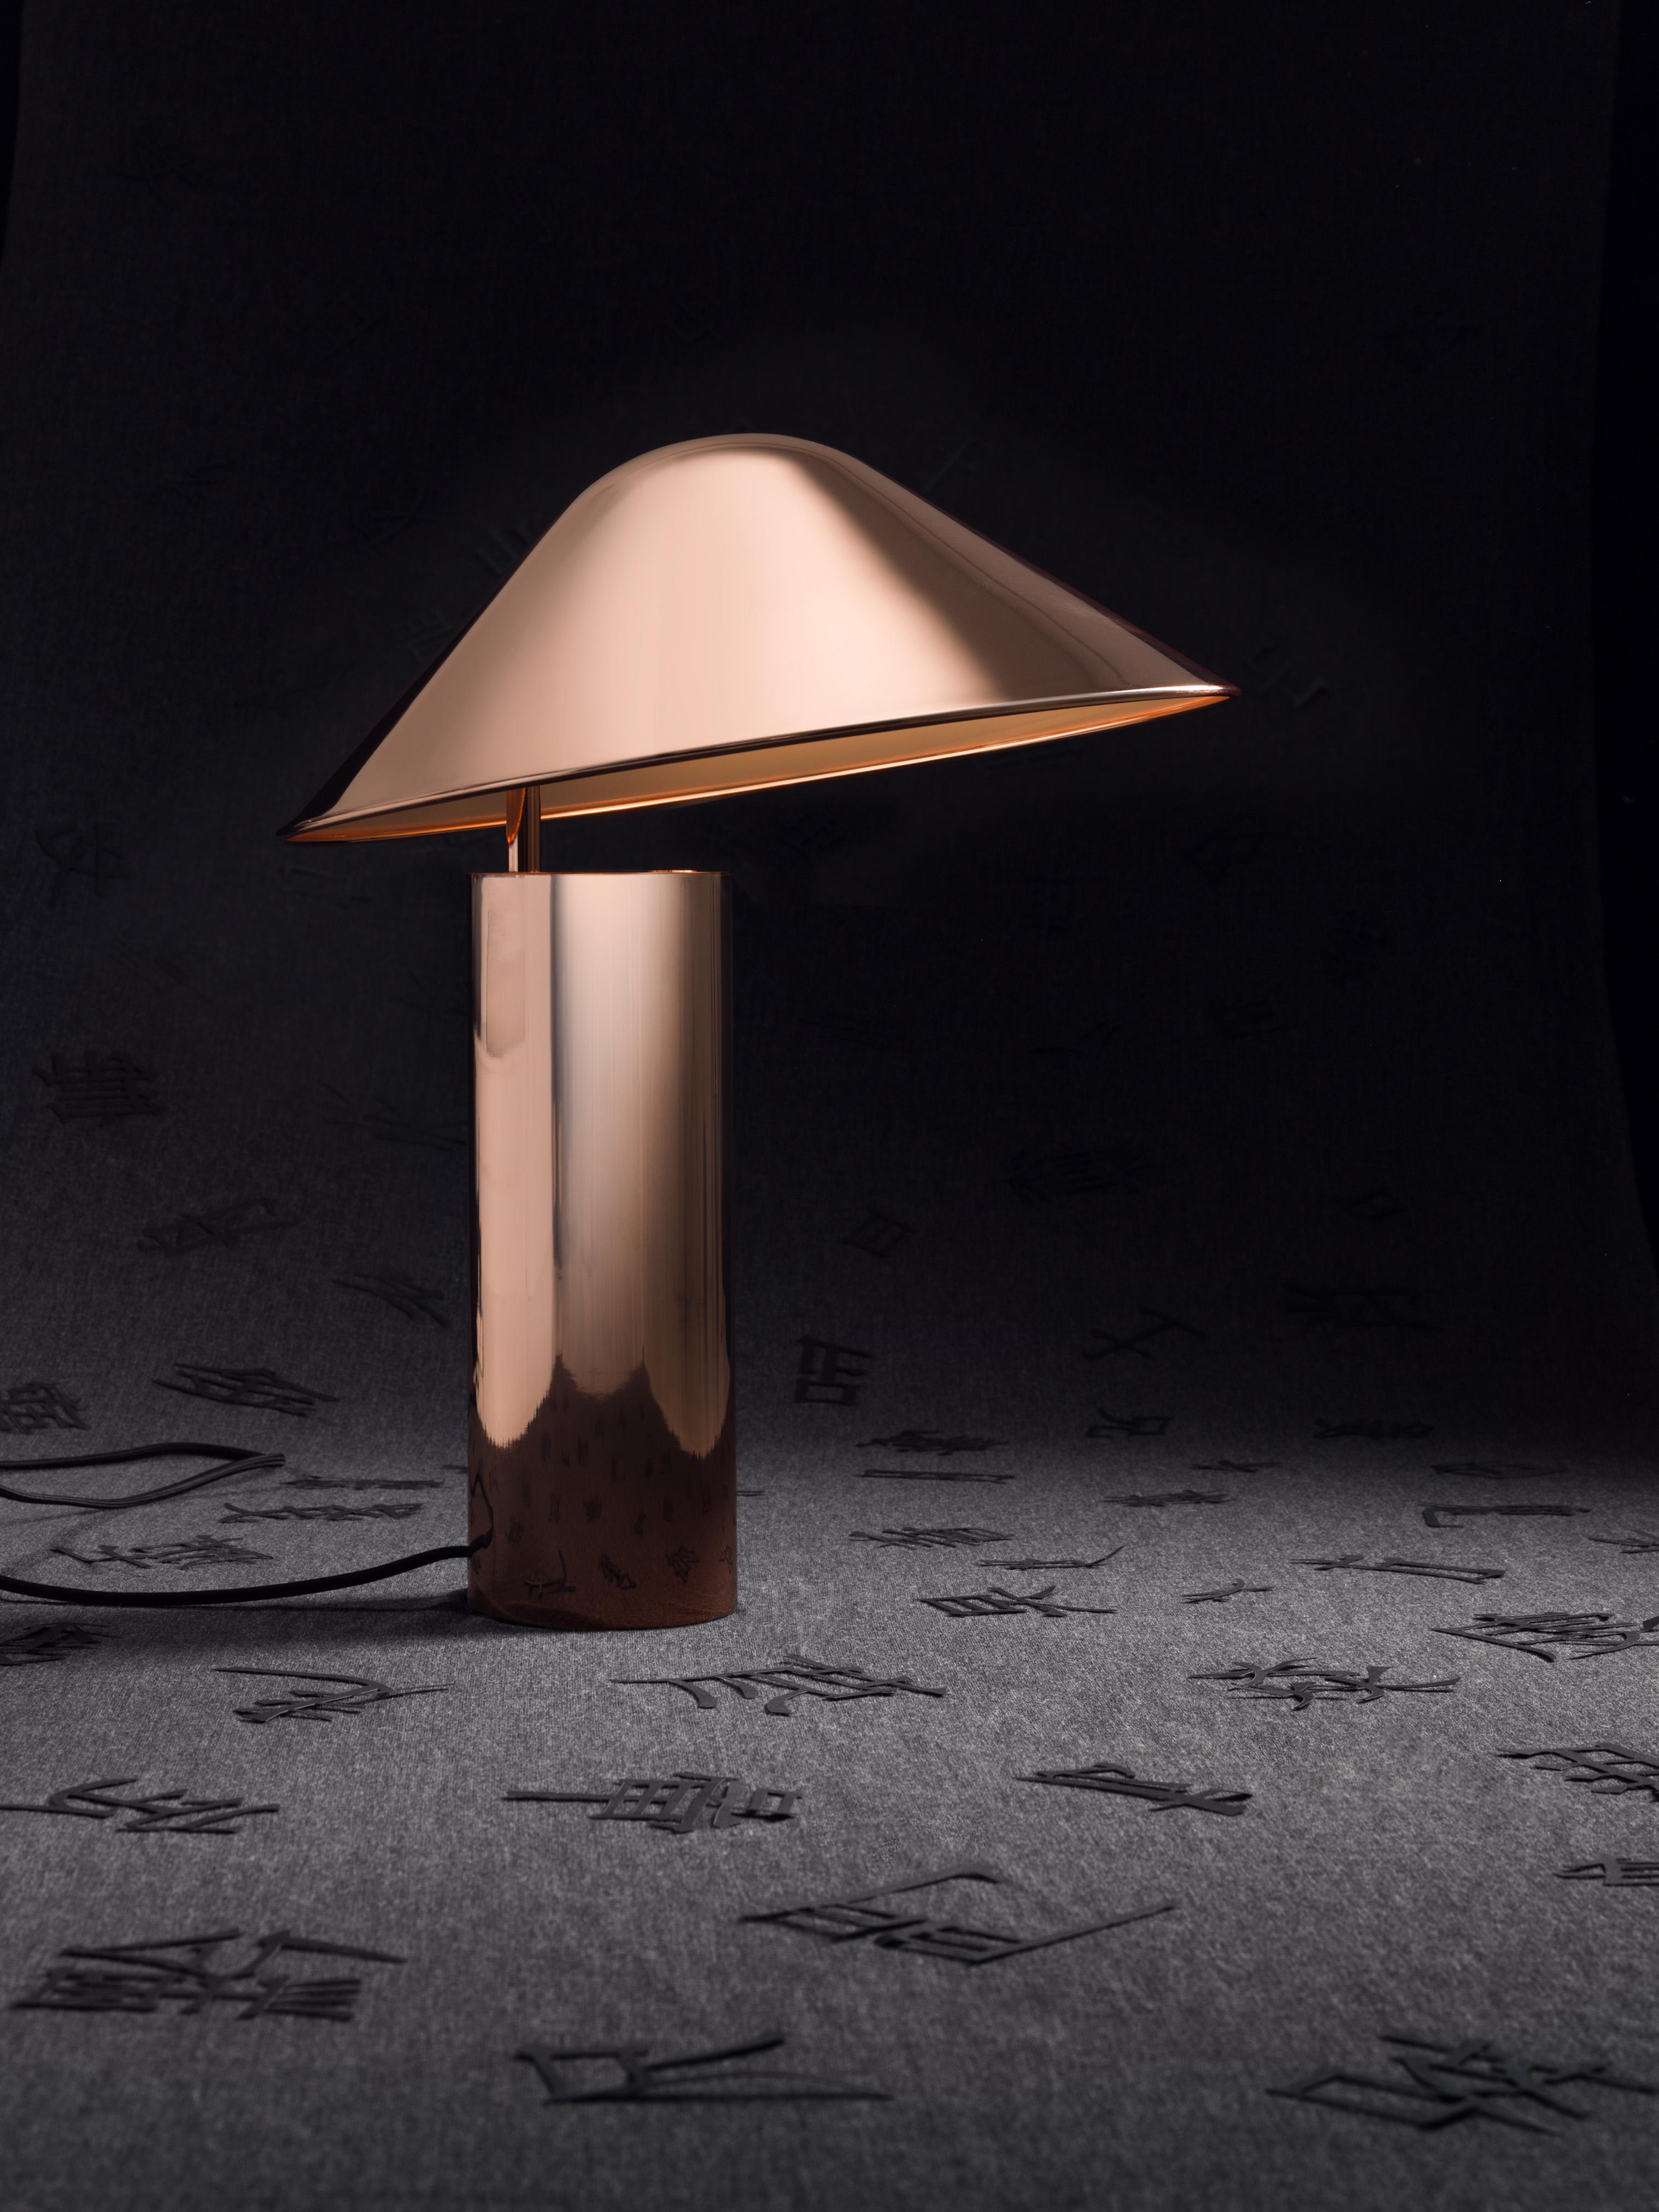 DAMO SIMPLE Table Lamp not only crafts a sense of serenity, it also instills utmost vitality through its brightness, clarifying your innermost thoughts when needed.

Material:
Steel

Color:
Matt black / copper / chrome / white / champagne